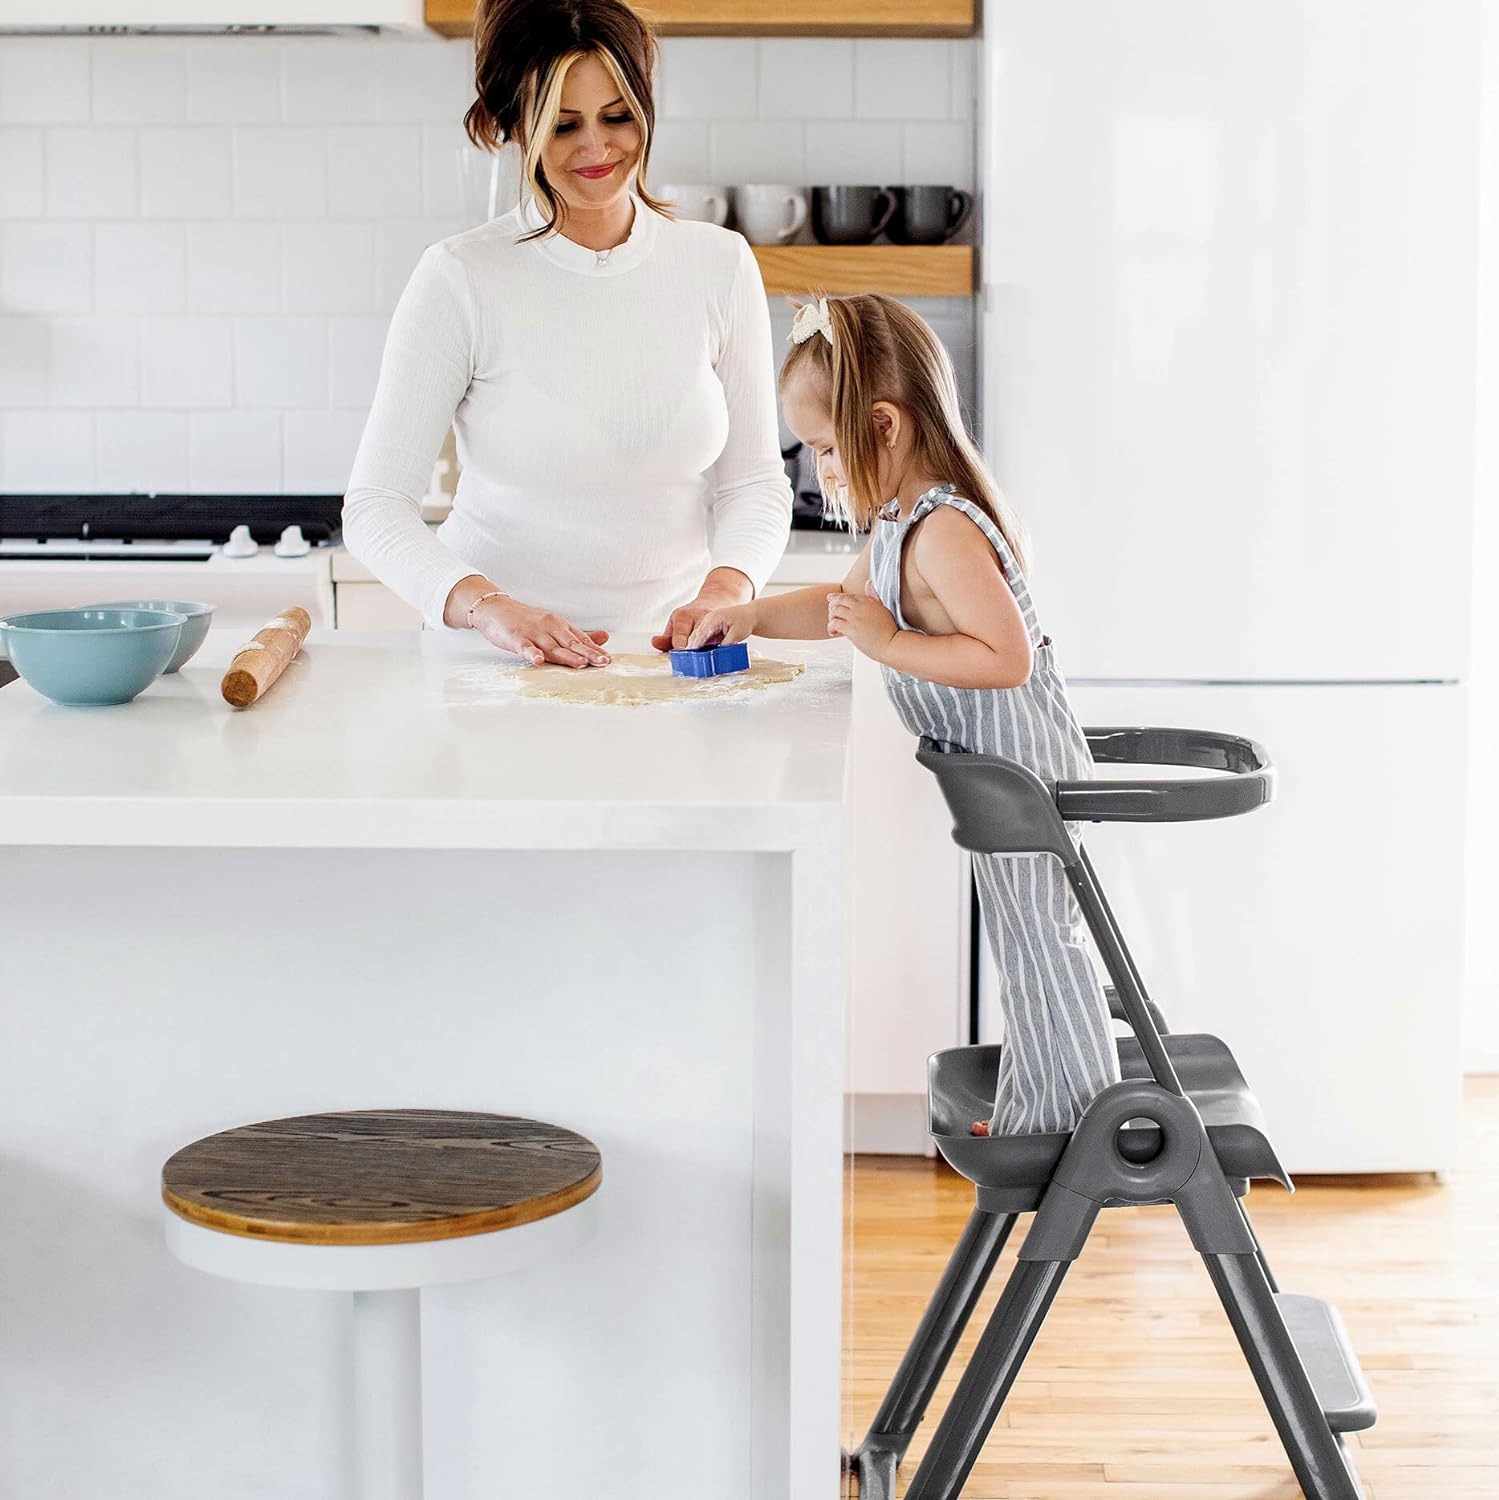 Hi mommas and papas! If youre short on time heres the gist, its easy to assemble(only the bottom step), clean, sturdy, and compact when not in use. Perfect for your littles who enjoy hanging out with you. My daughter loves this and asks to use it all the time. This is a valuable investment for us.Im a first time mother and Ive been looking for something like this for about 1.5 years. My daughter is about to turn two and I was really excited at the possibility of her being able to hang with 